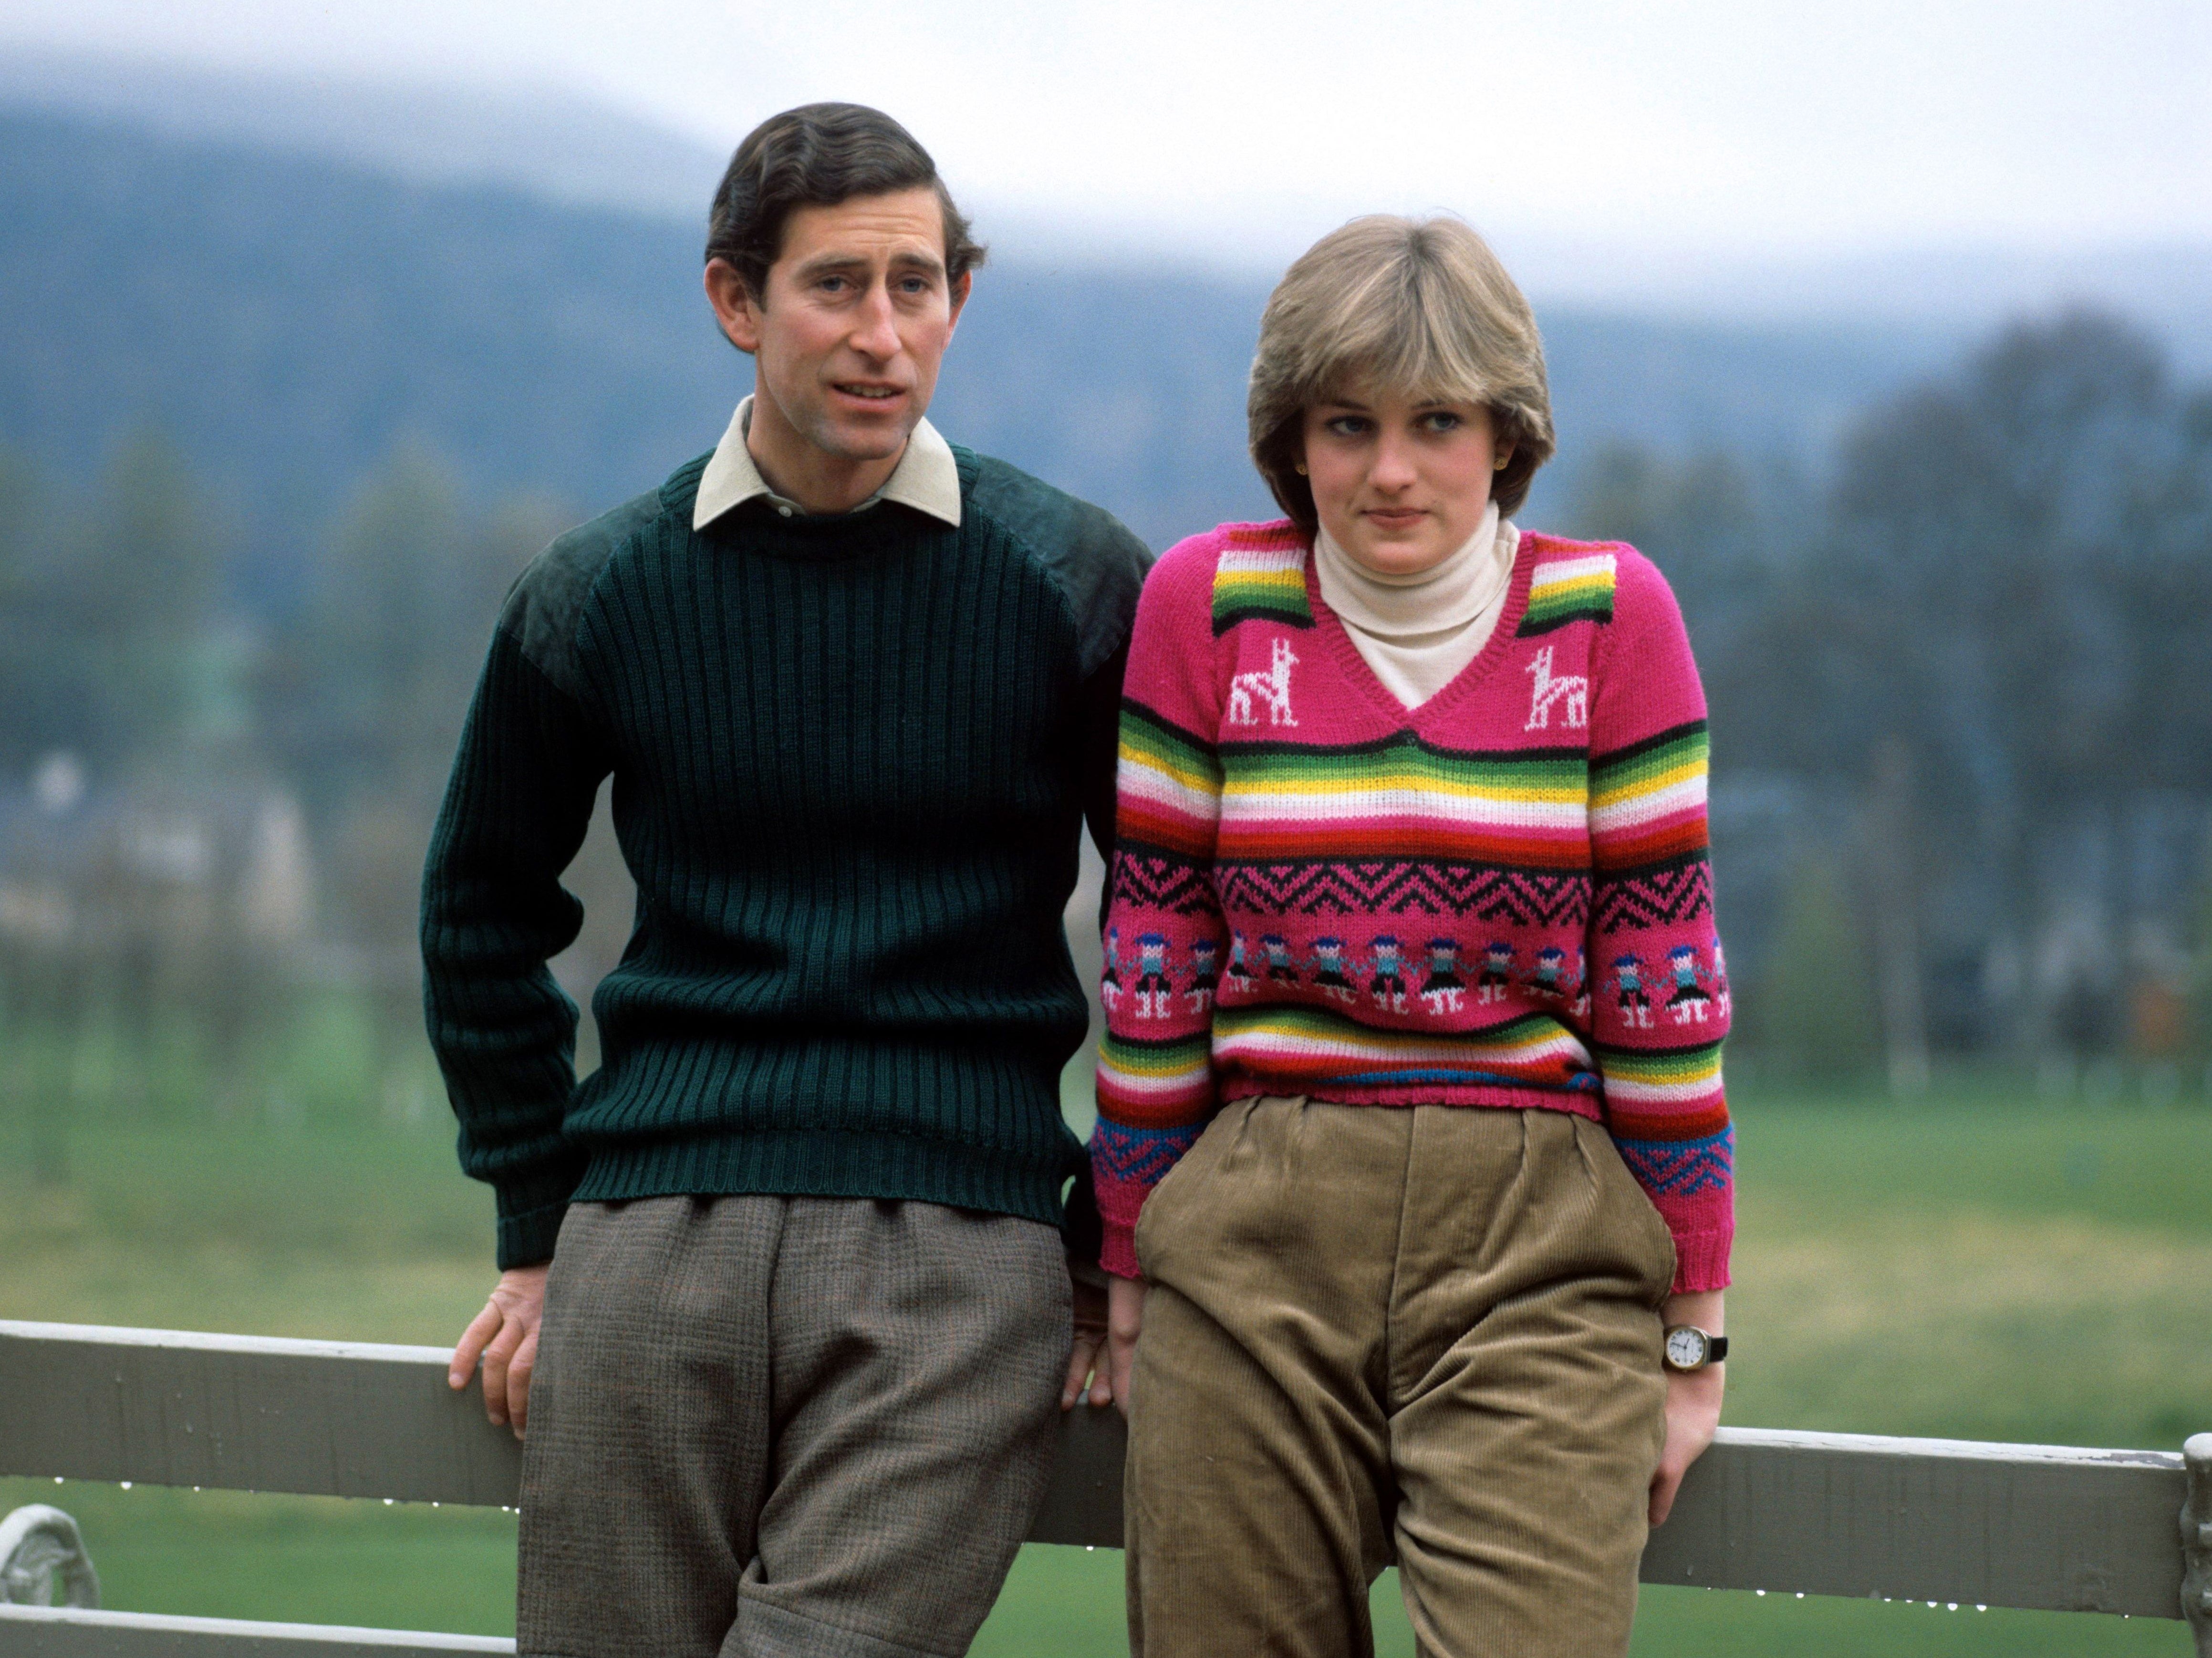 Prince Charles pictured at Balmoral in Scotland alongside Princess Diana in May 1981. The Princess wore one of her memorable knits for the occasion: a v-neck alpaca wool number with pink, green and purple stripes. Diana wore the jumper with a loose-fitting pair of beige trousers.